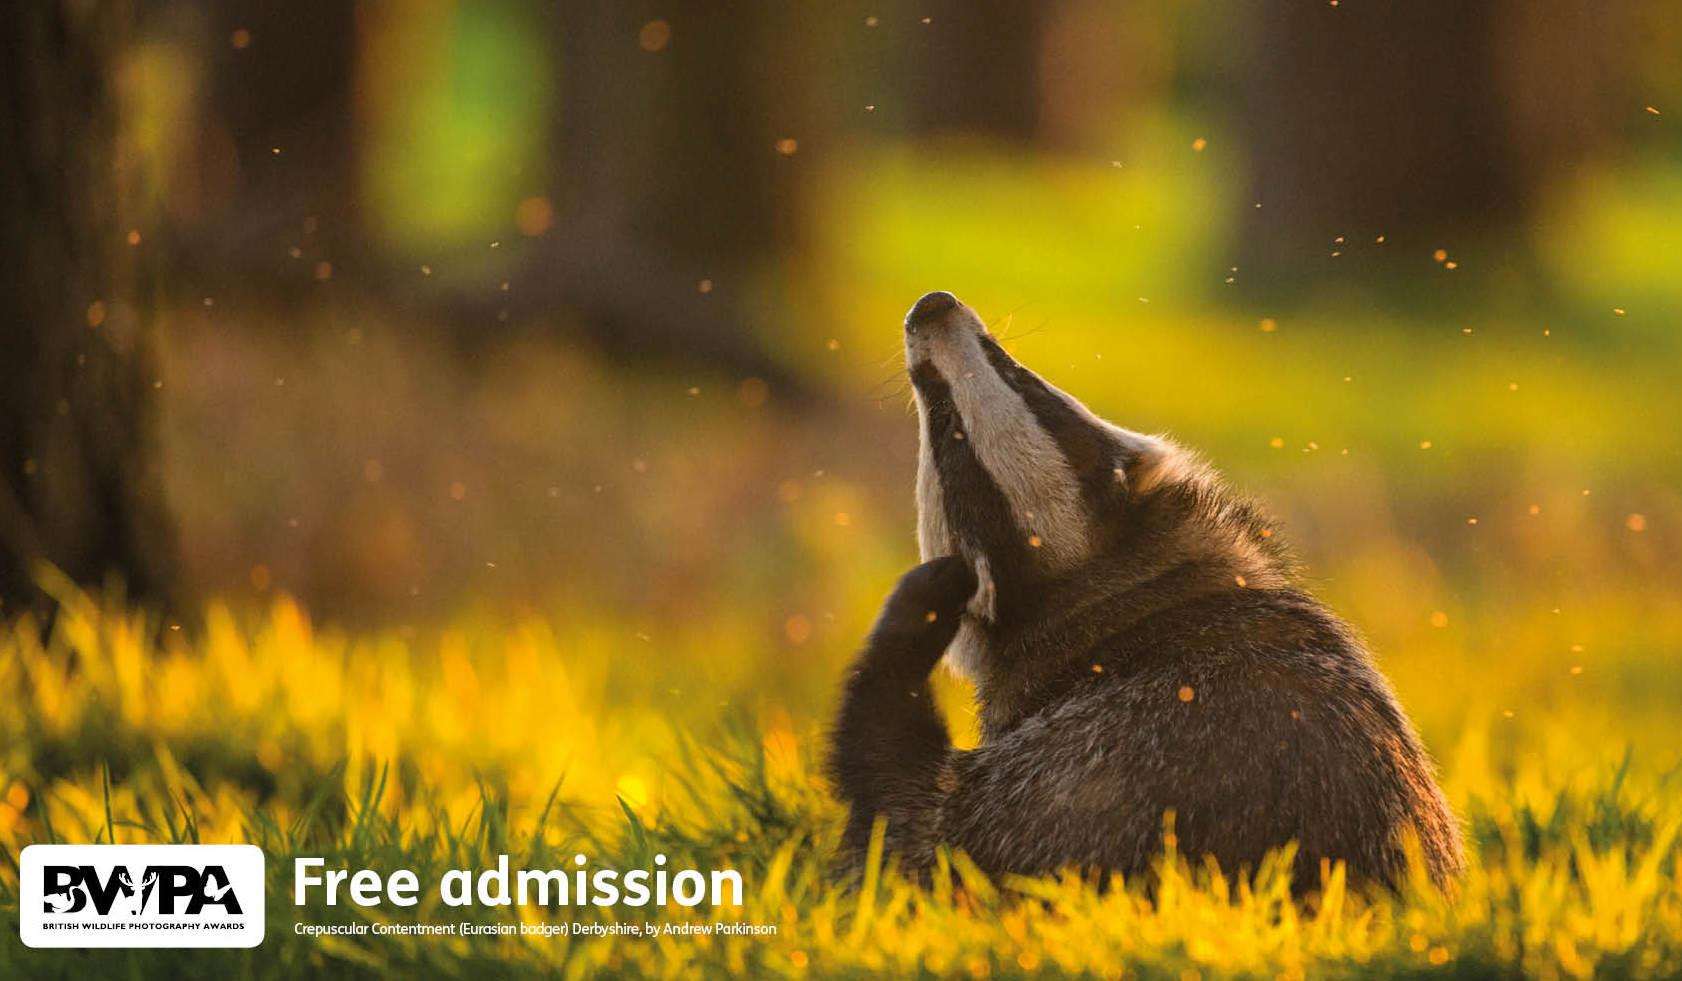 British Wildlife Photography Awards at The Beaney. Image credit: Crepuscular Contentment (Eurasian badger) Derbyshire, by Andrew Parkinson